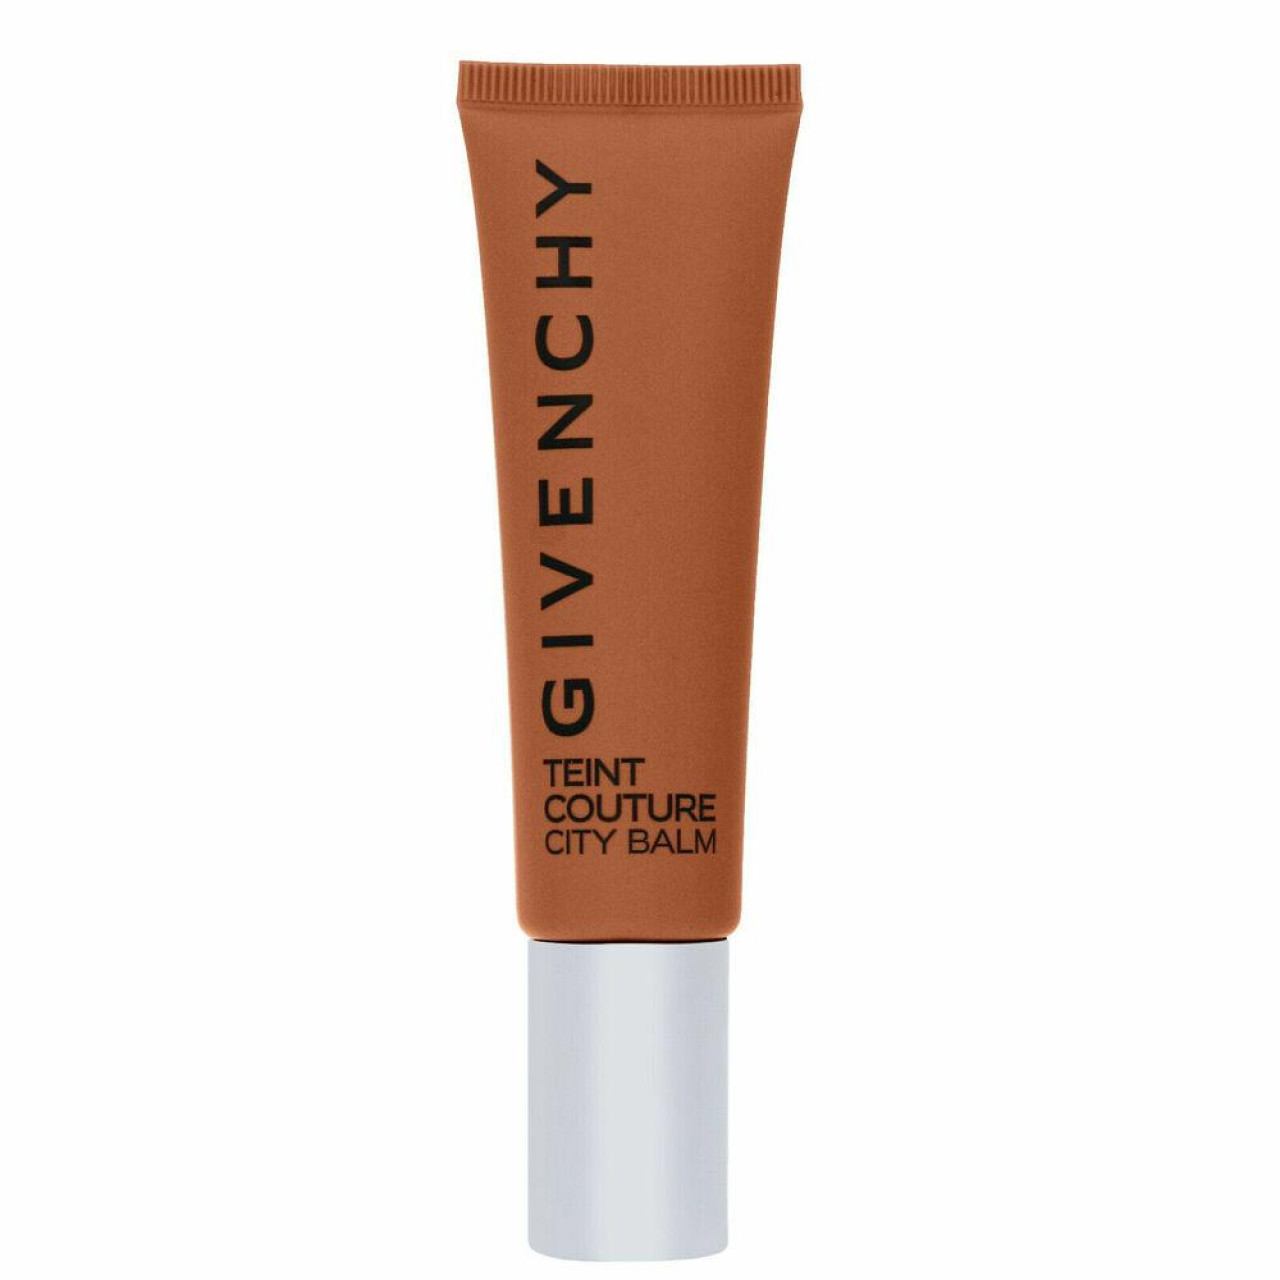 Givenchy teint couture city balm c345